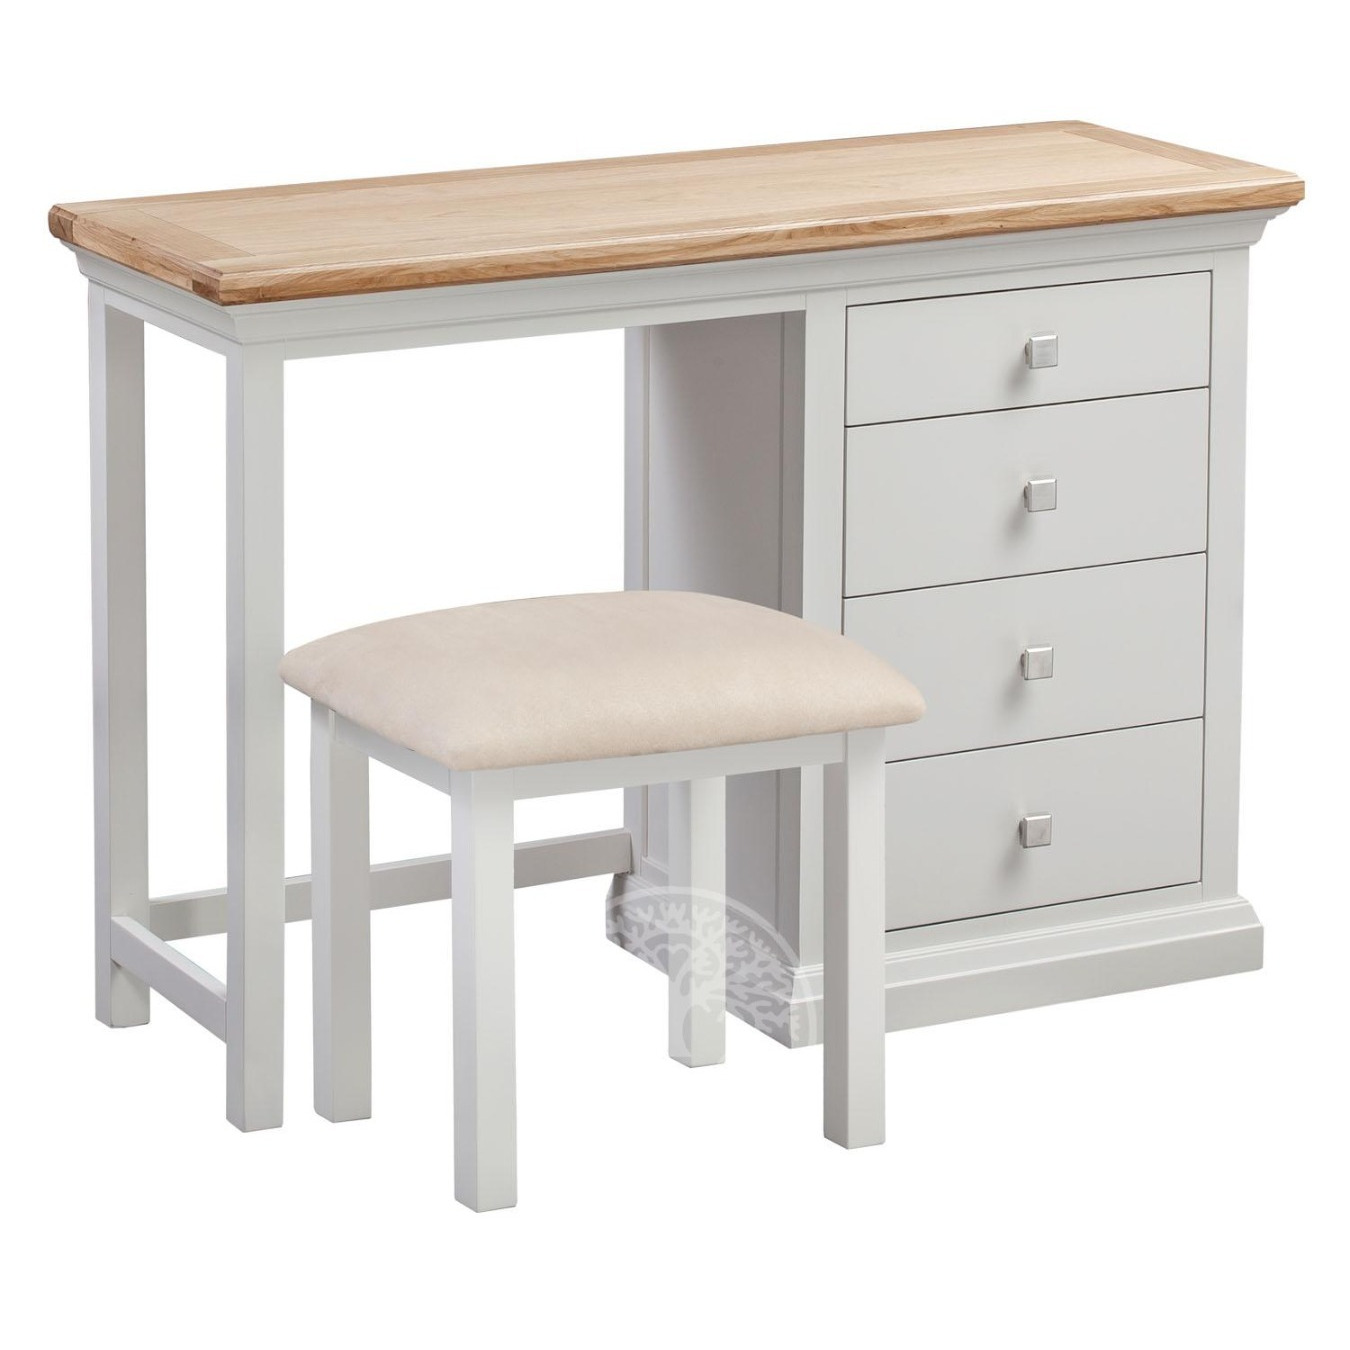 Wedmore Oak and Grey Painted Dressing Table Set